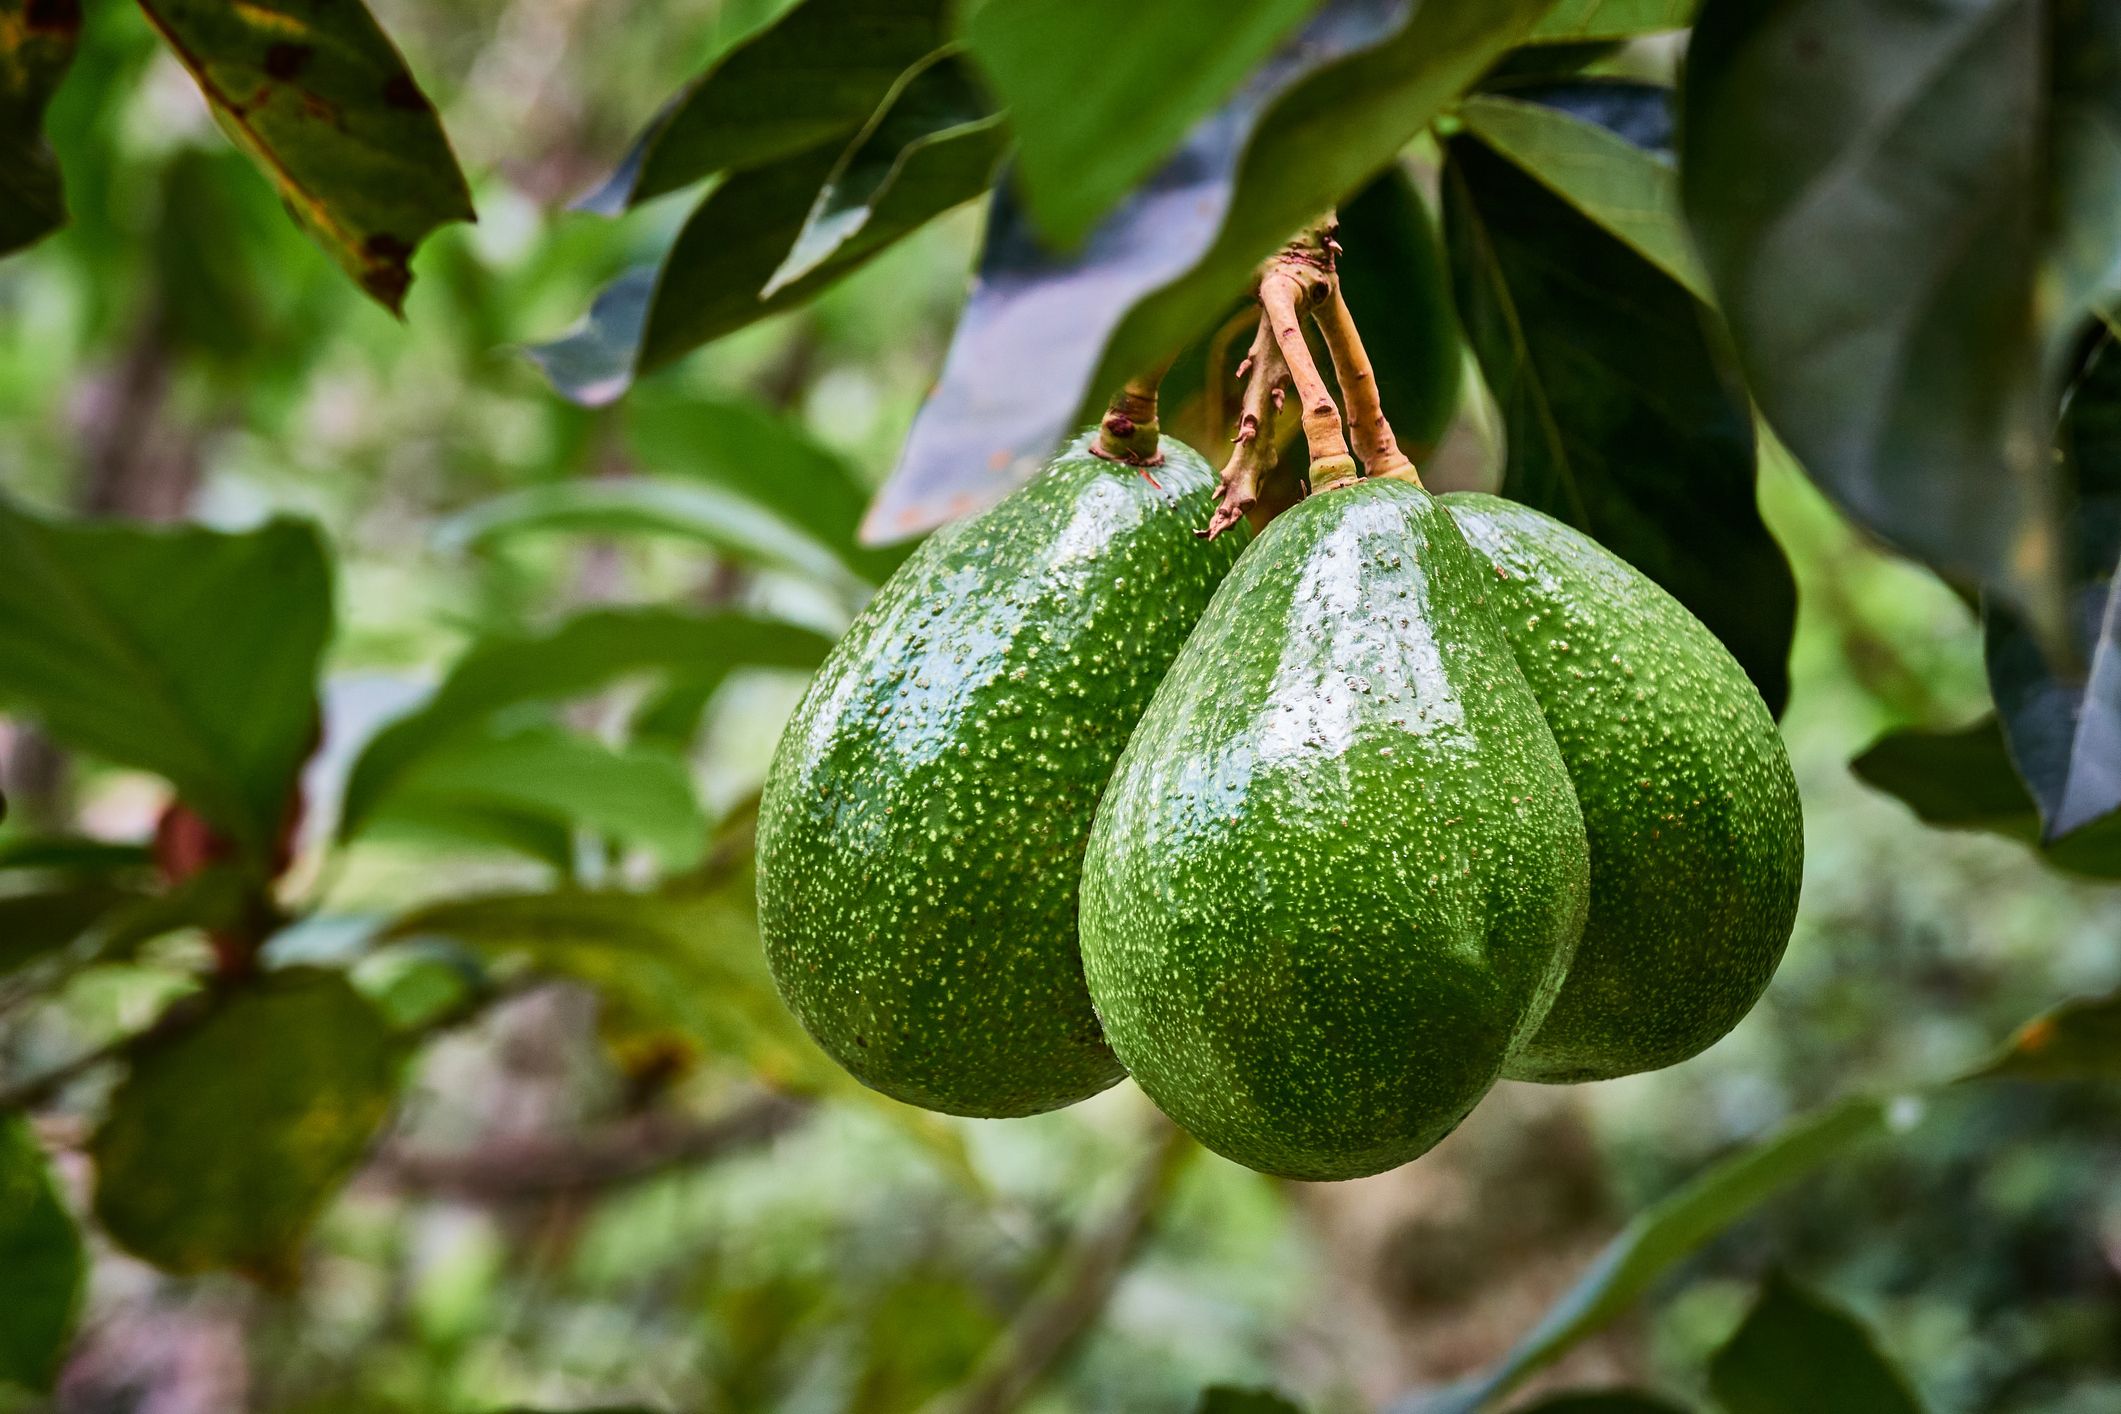 How To Grow An Avocado Tree Growing An Avocado From A Pit Indoors